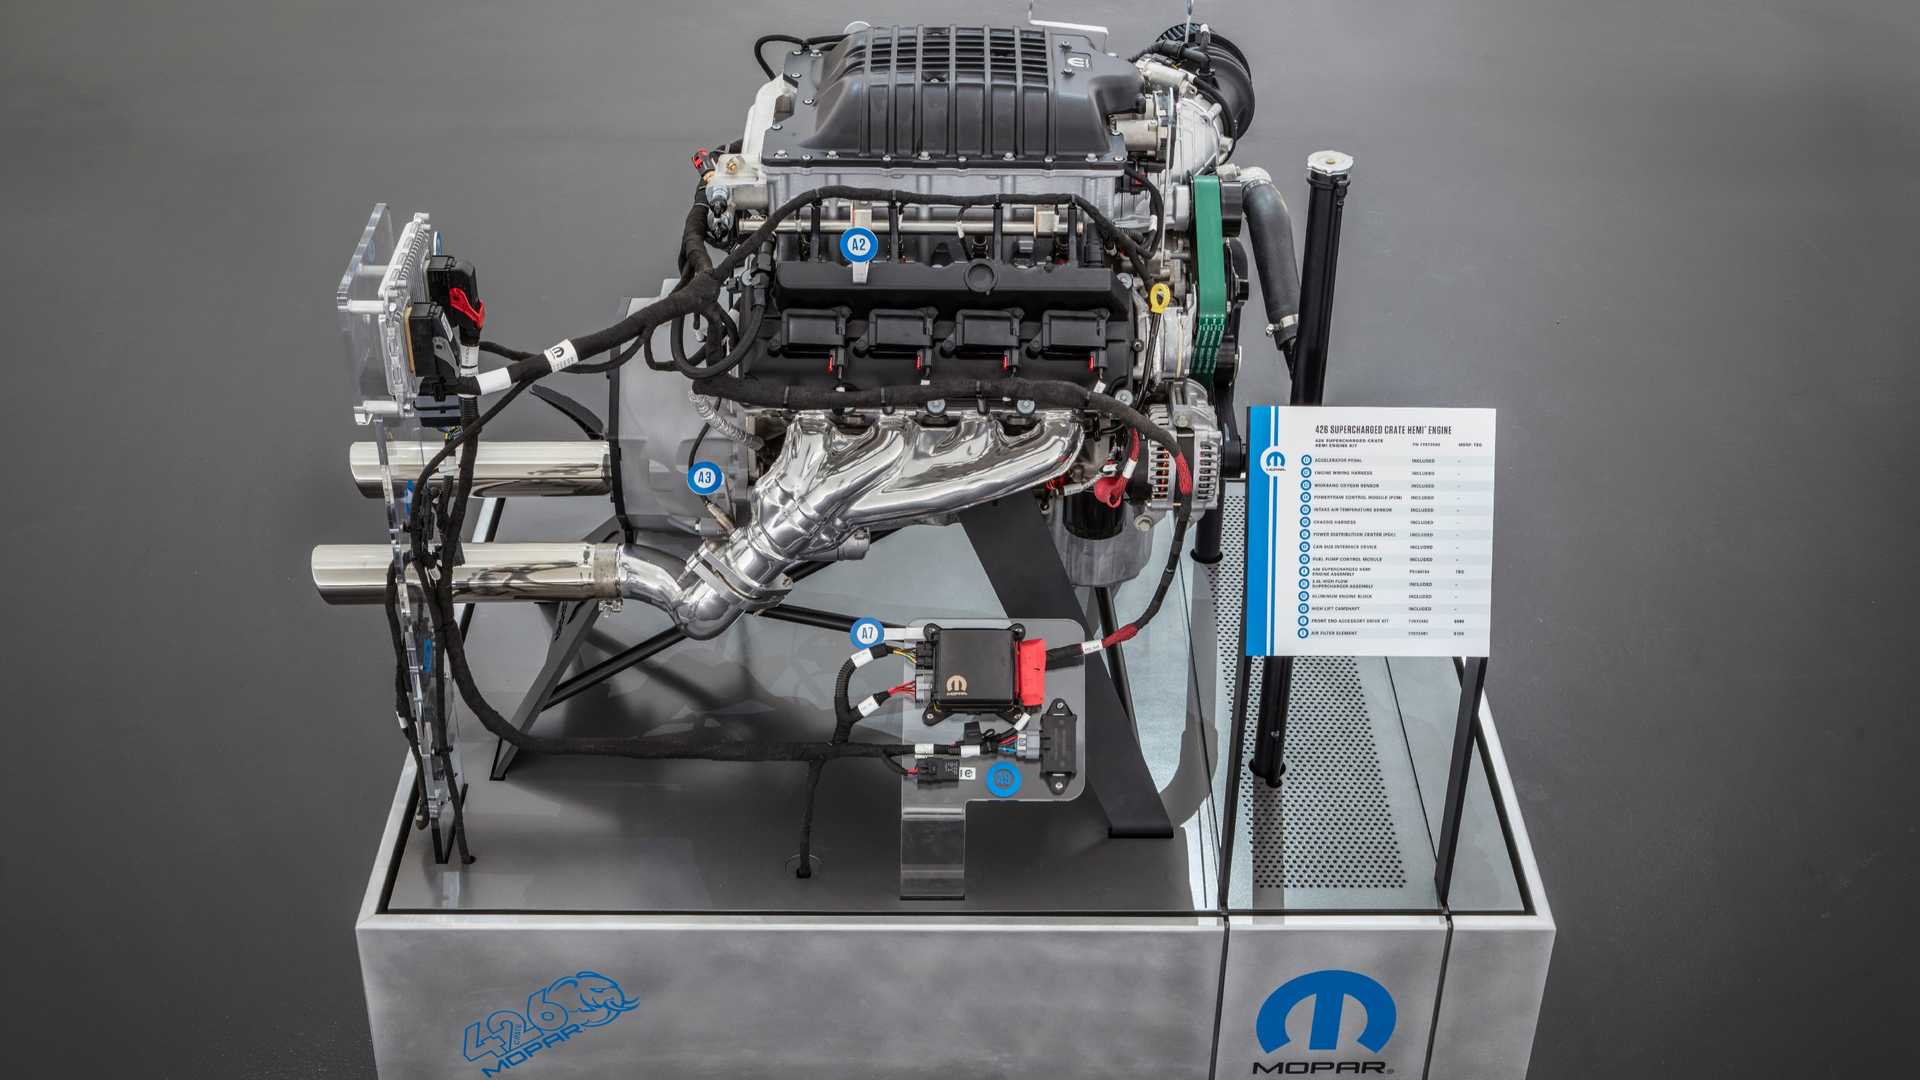 Mopar Hellephant Supercharged Hemi V8 Available To Order For